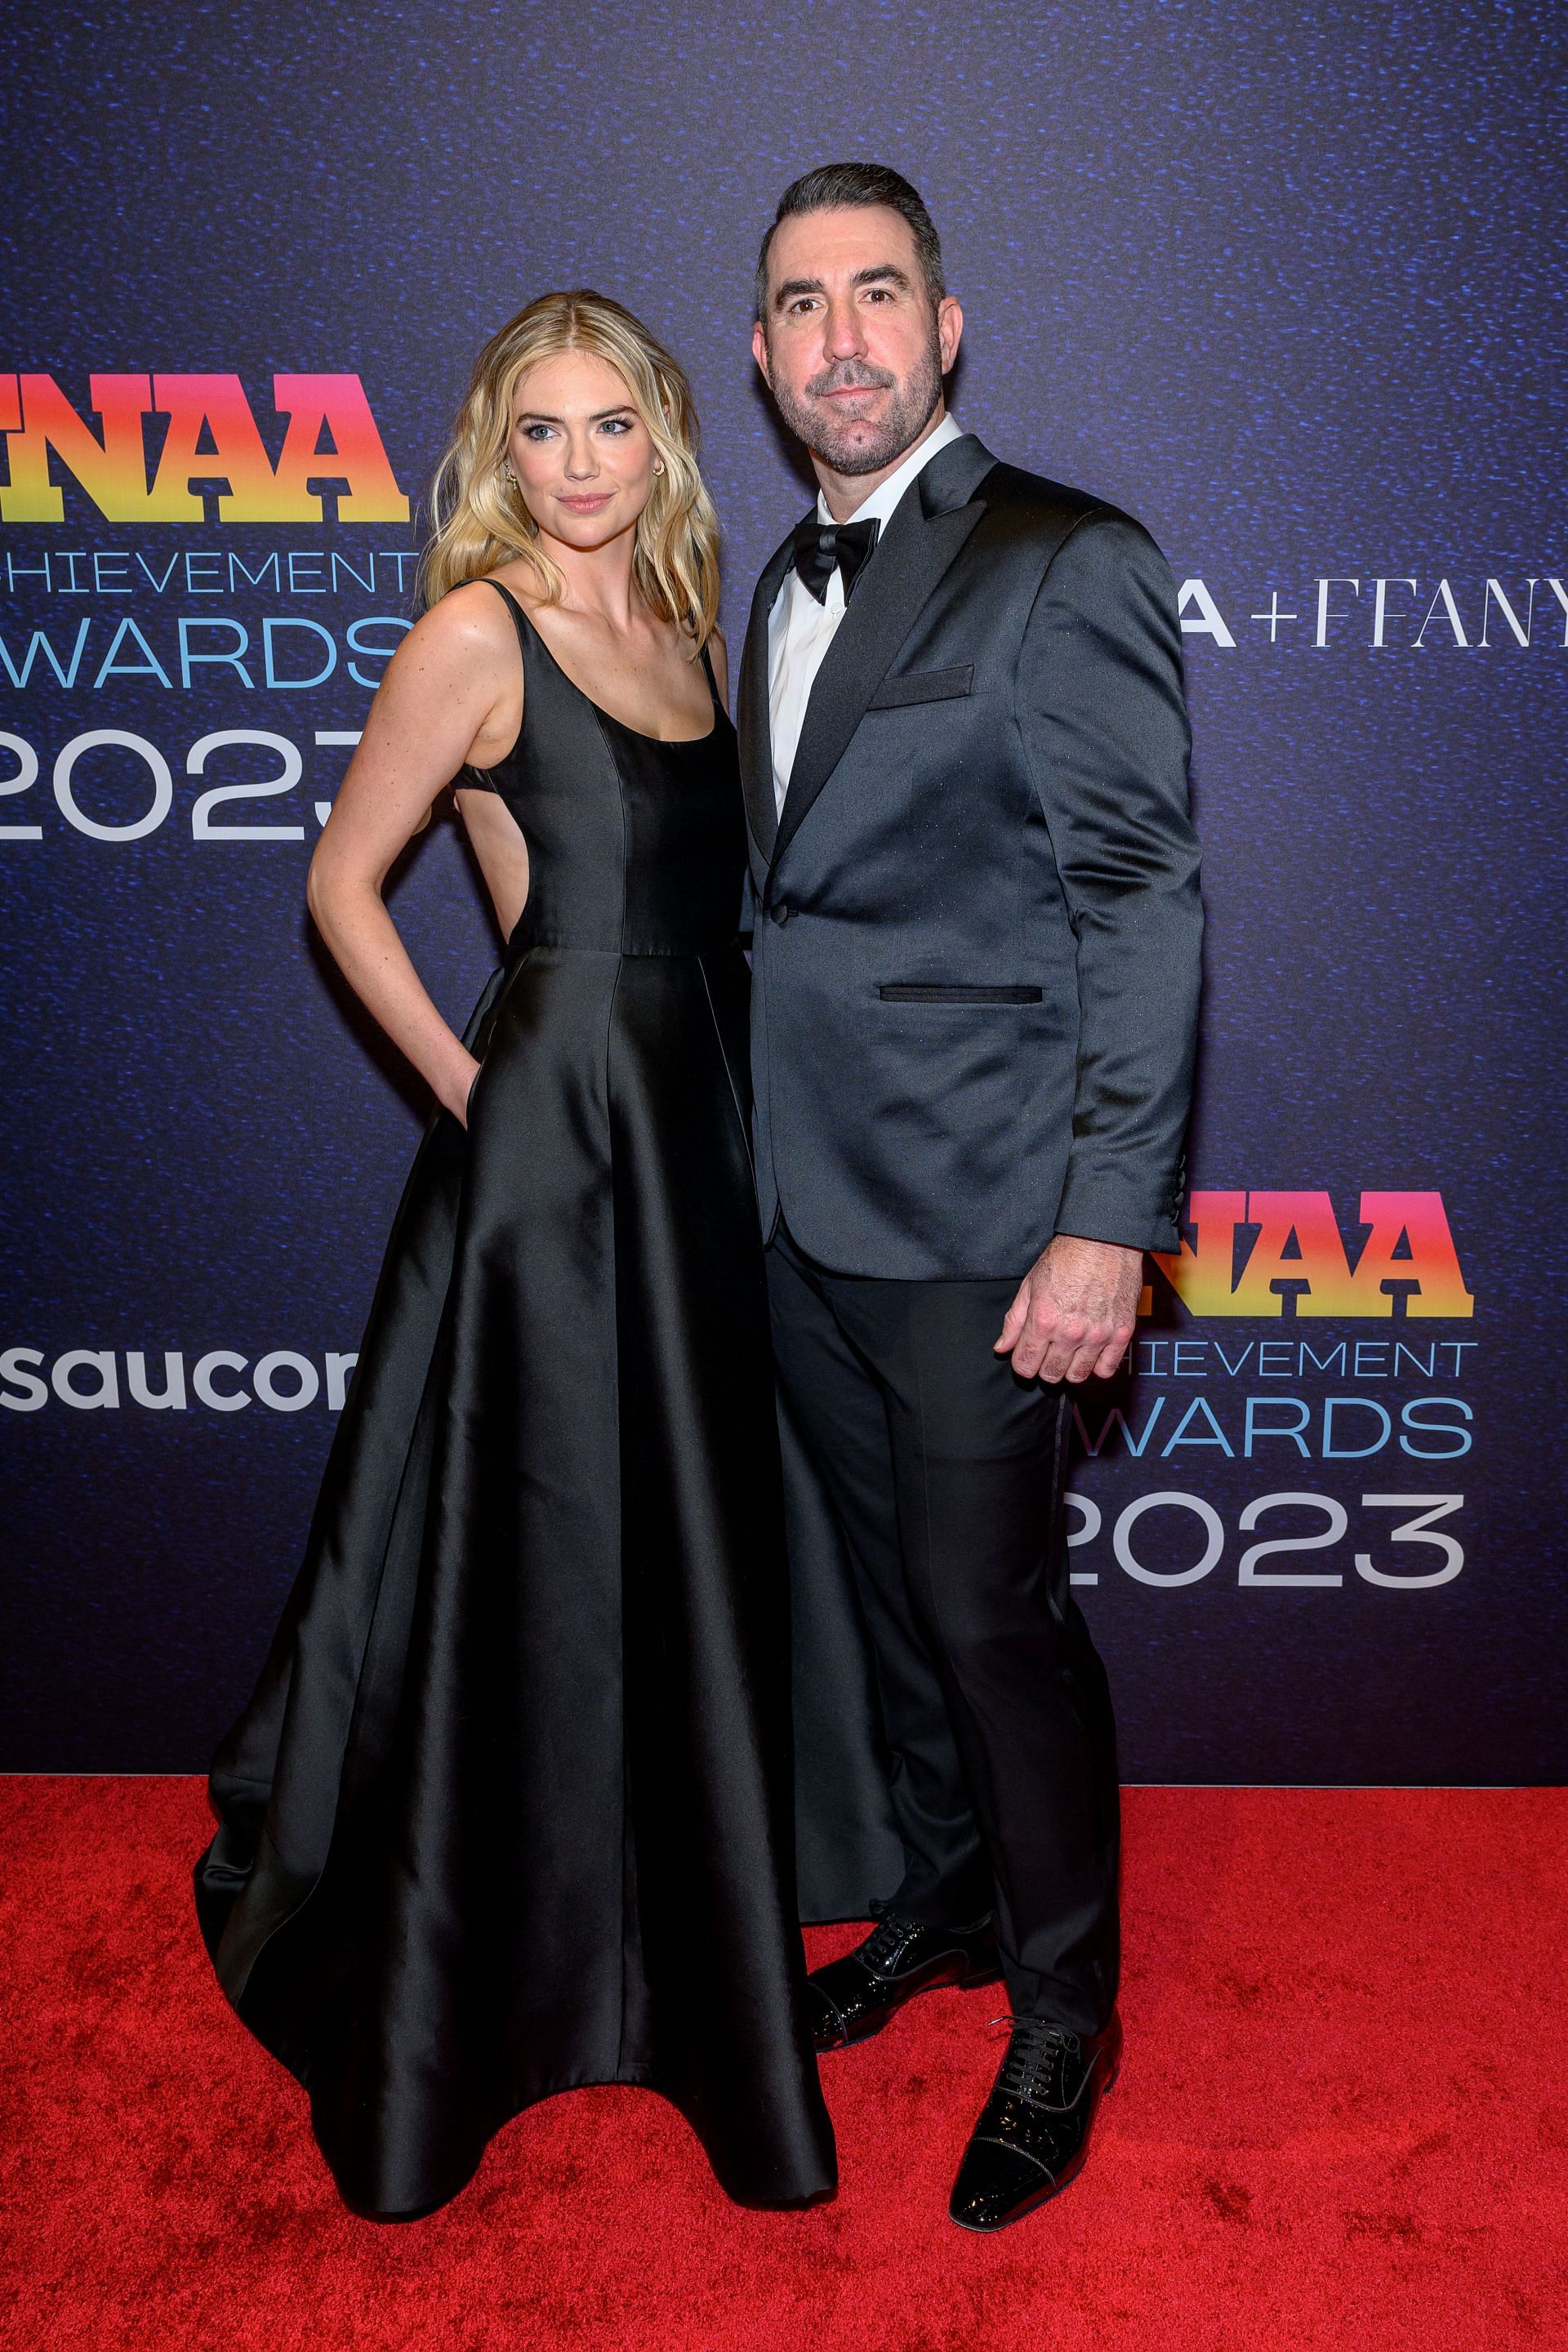 Kate Upton and Justin Verlander showed at the 37th Annual Footwear News Awards.